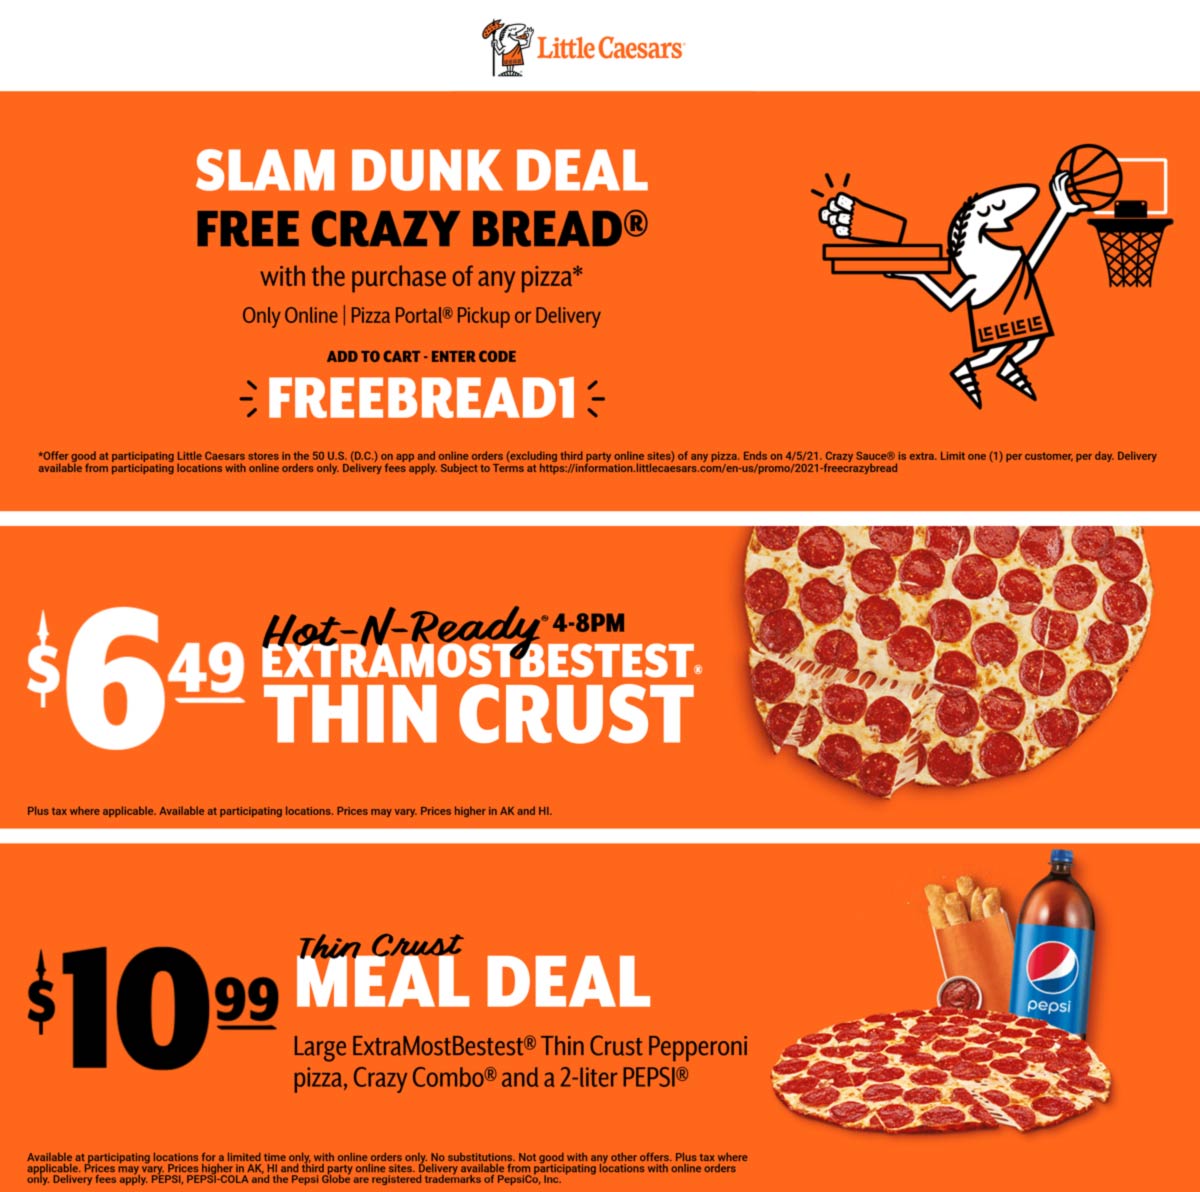 Free crazy bread with any pizza at Little Caesars via promo code